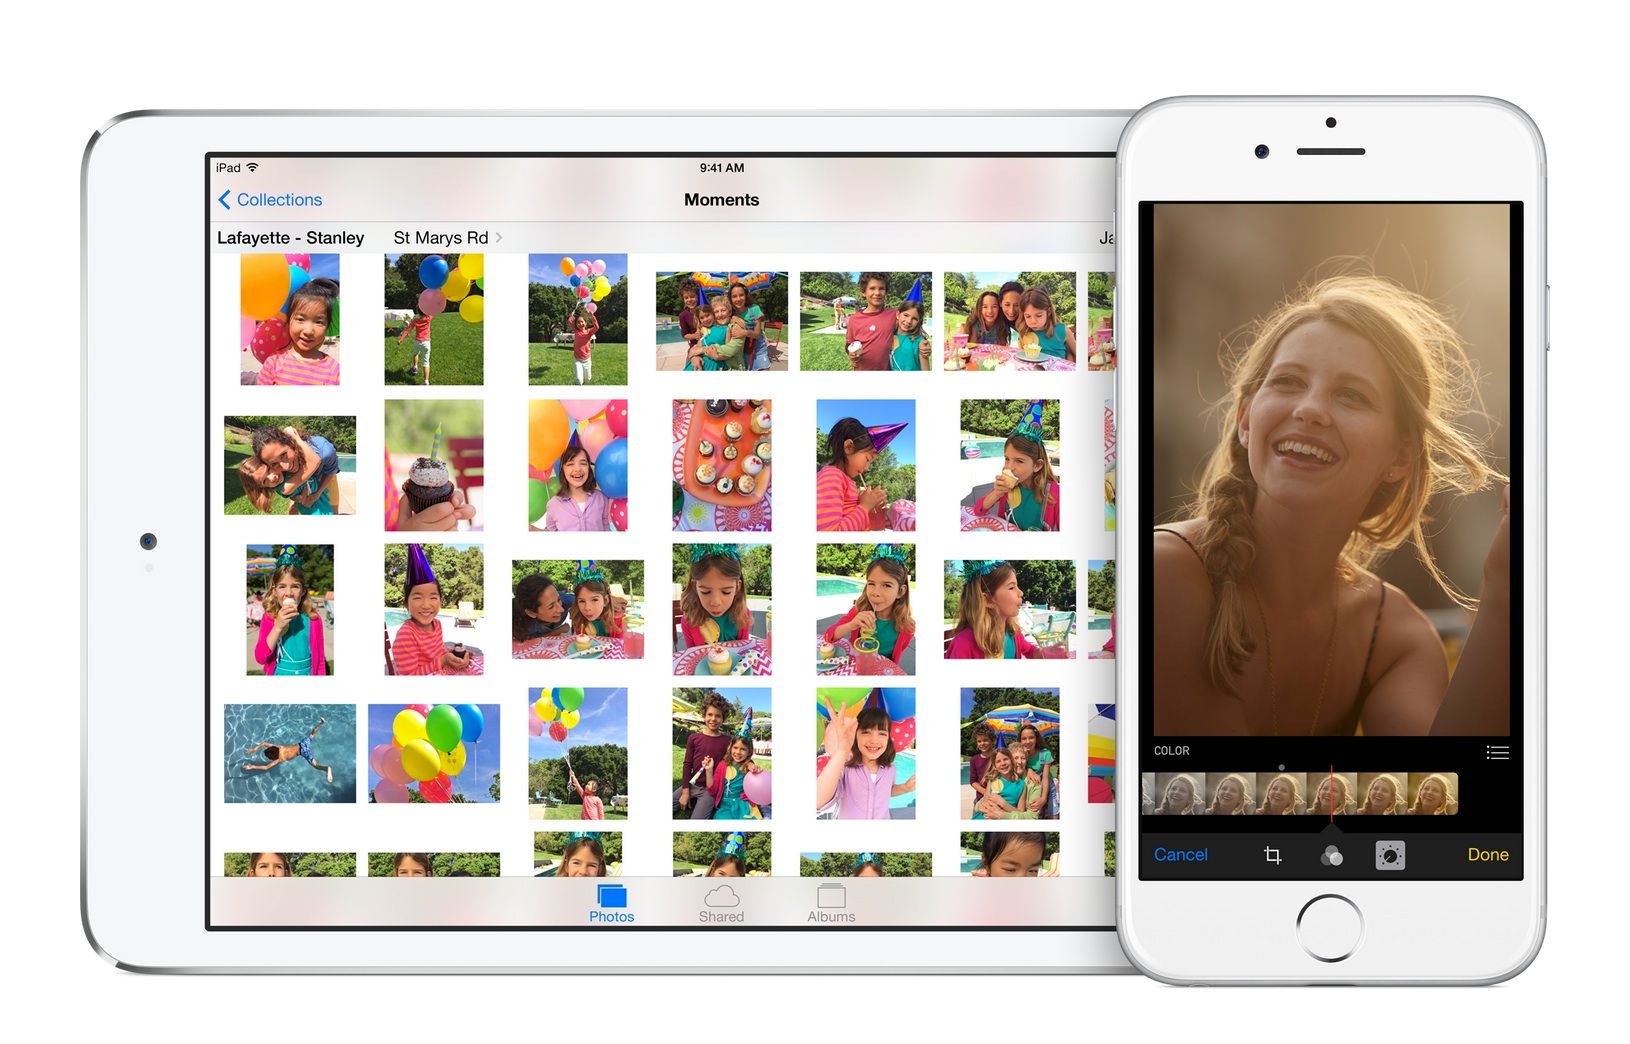 iOS8 new photo app with improved graphics, search, editing